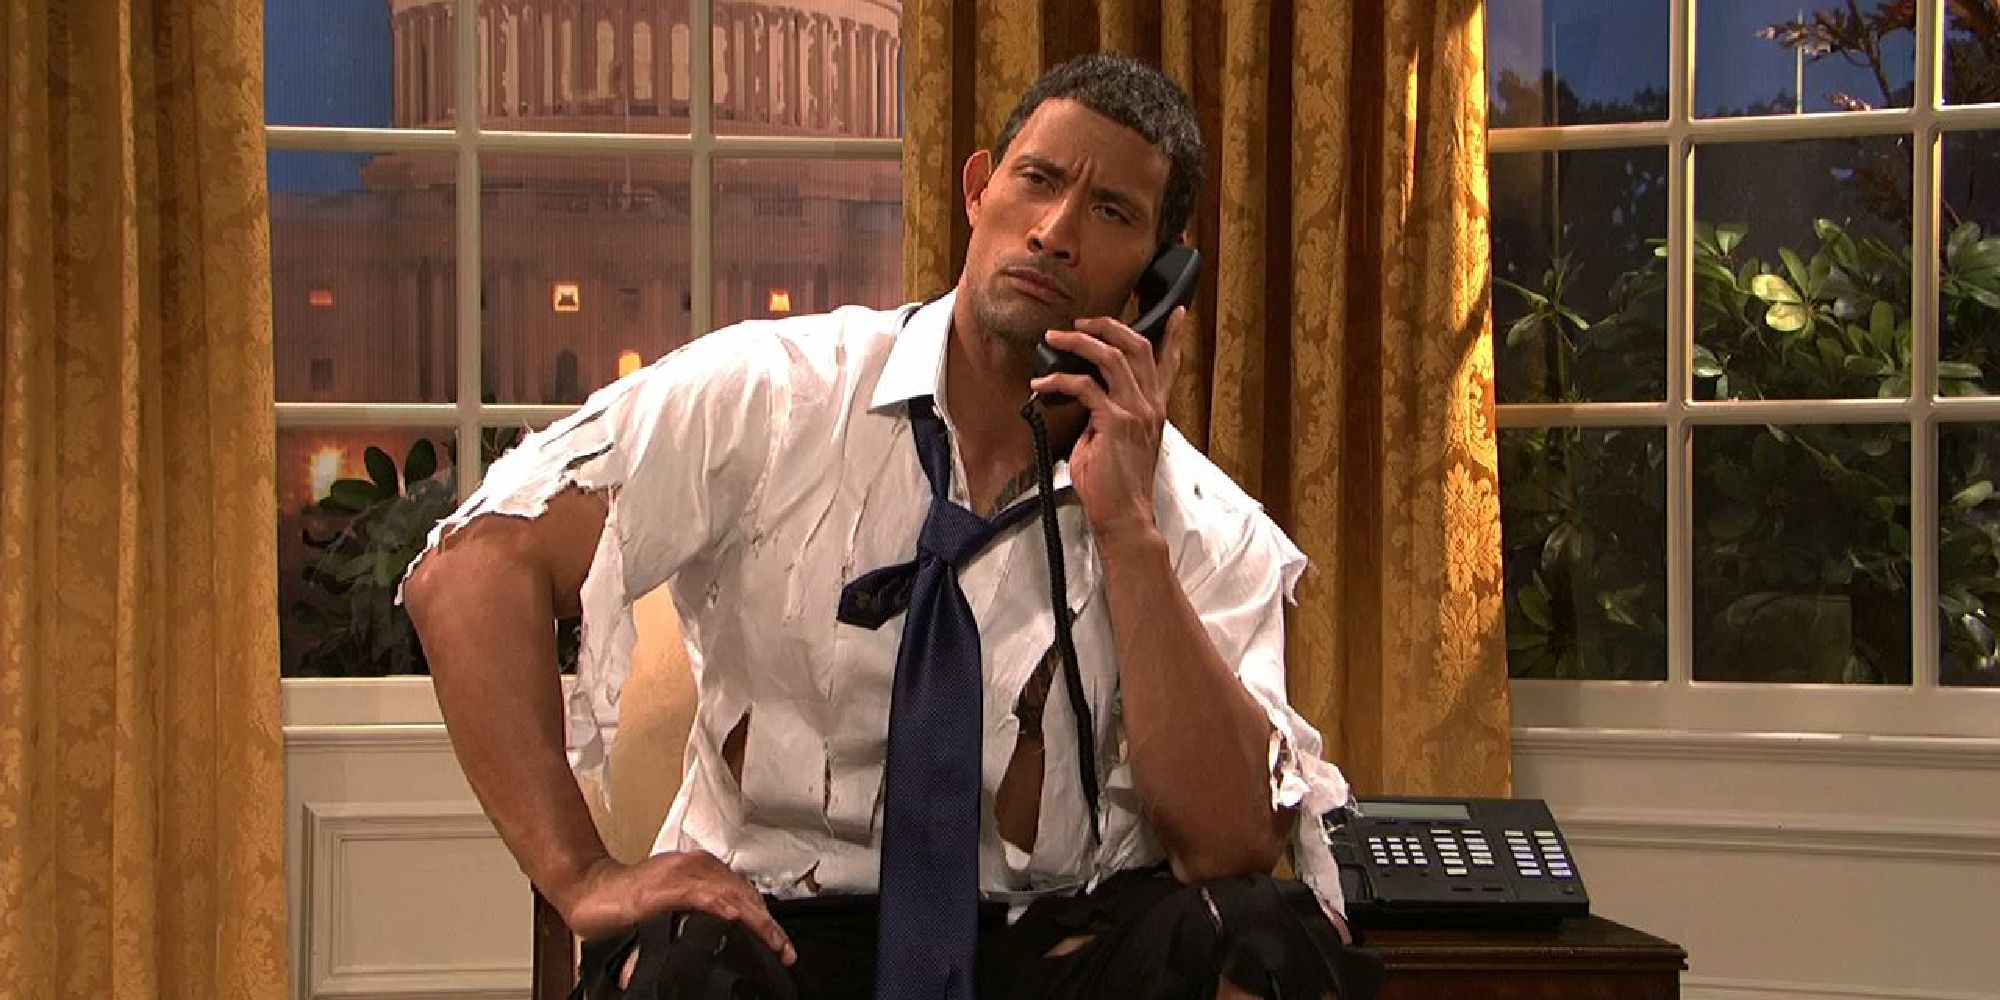 Dwayne Johnson as "The Rock Obama" answering a phone call